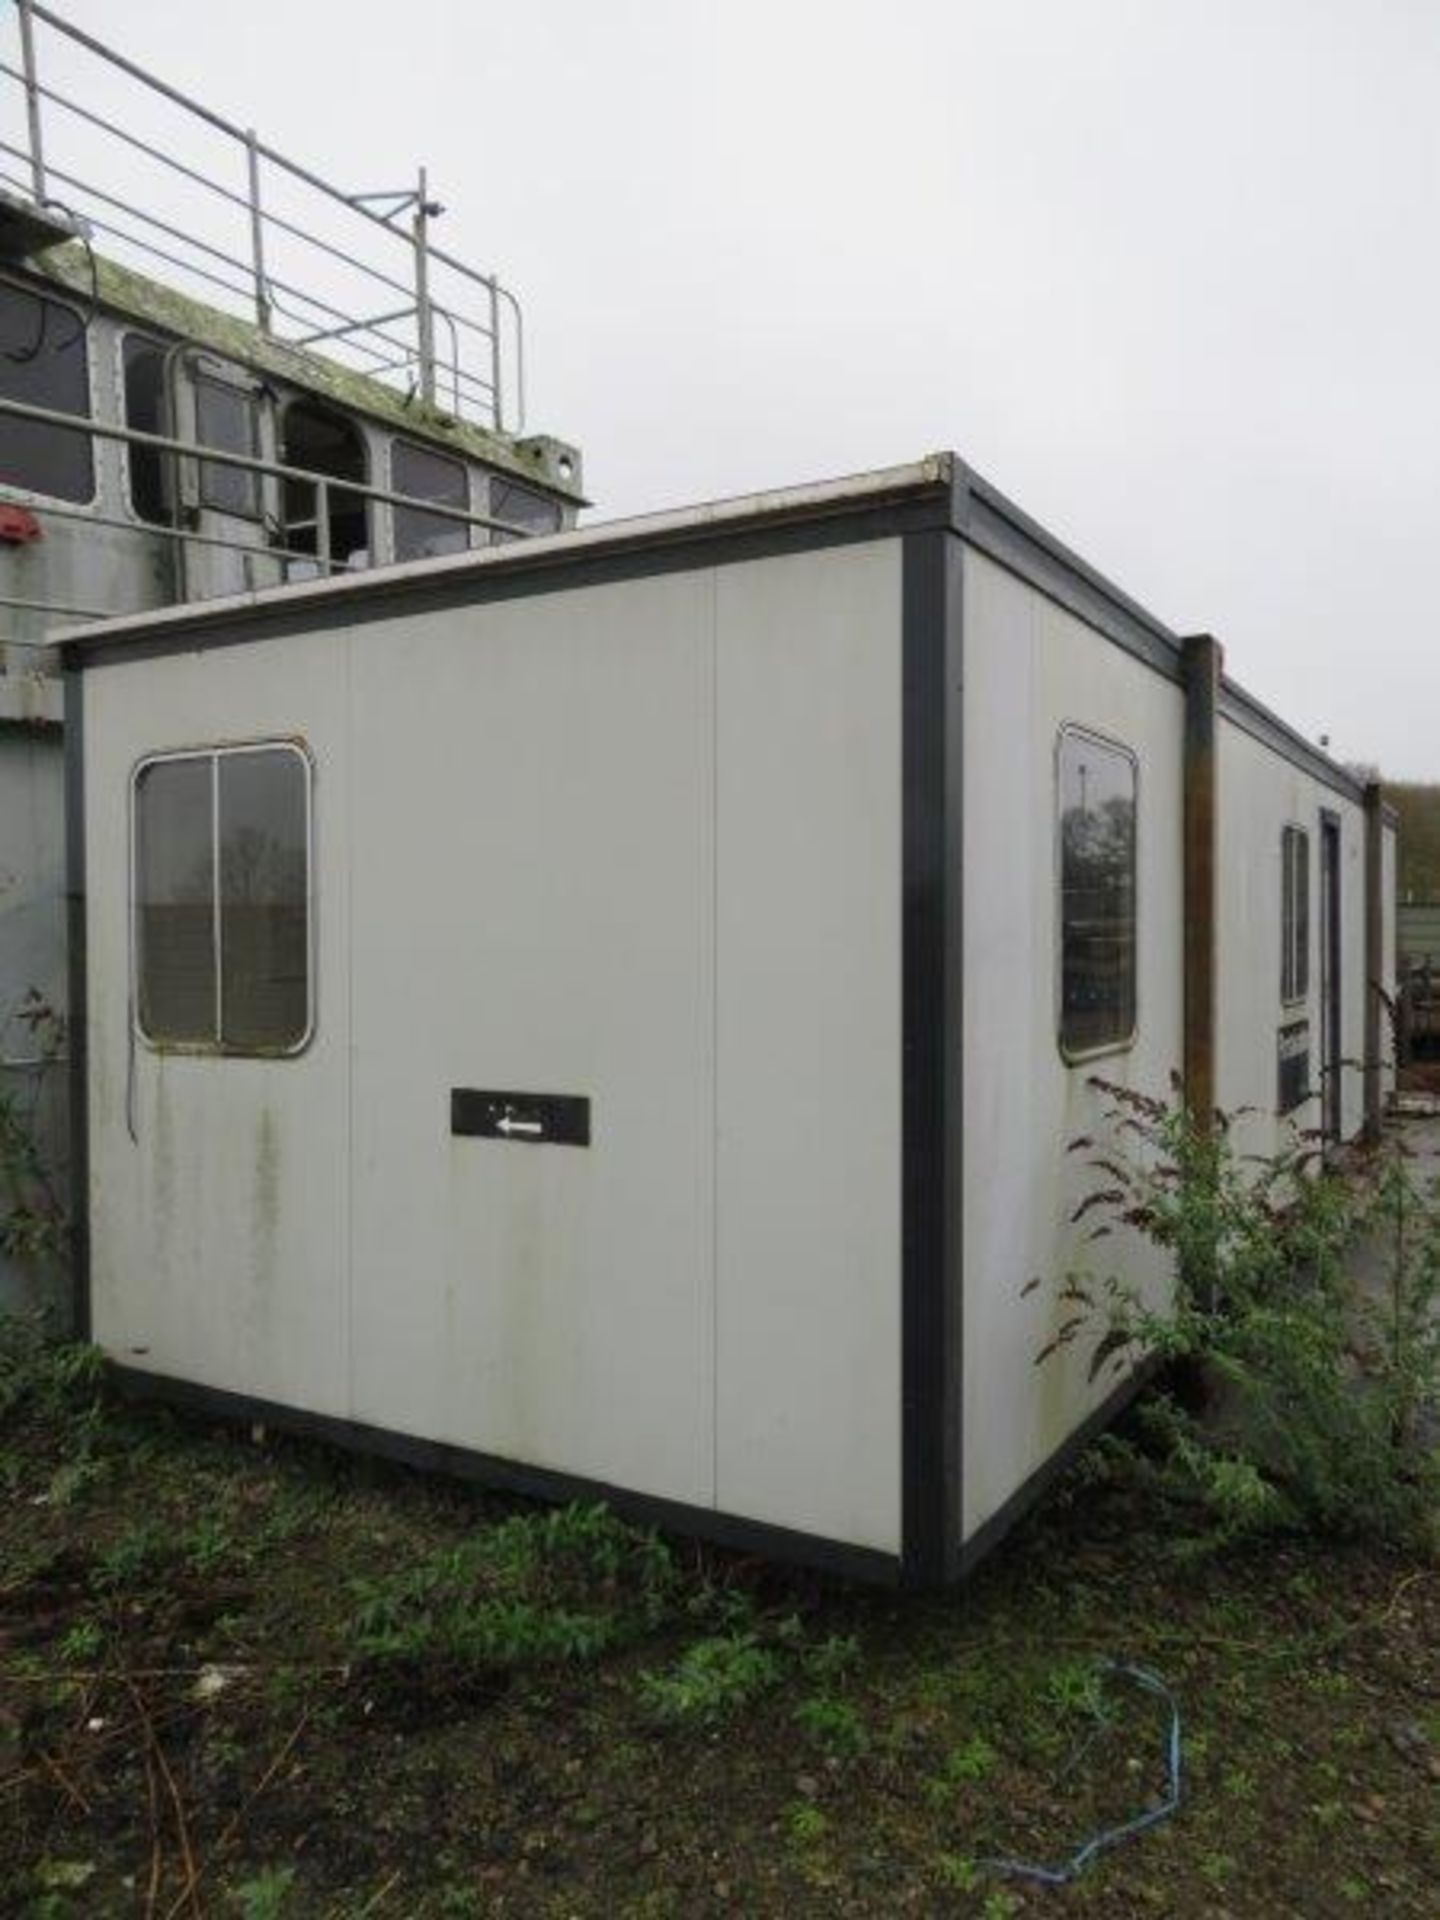 Large Cabin - 10.3M L x 3.1M wide x 2.7M high - LOCATED IN SOUTHAMPTON - OWN COLLECTION PREFERRED - Image 3 of 12